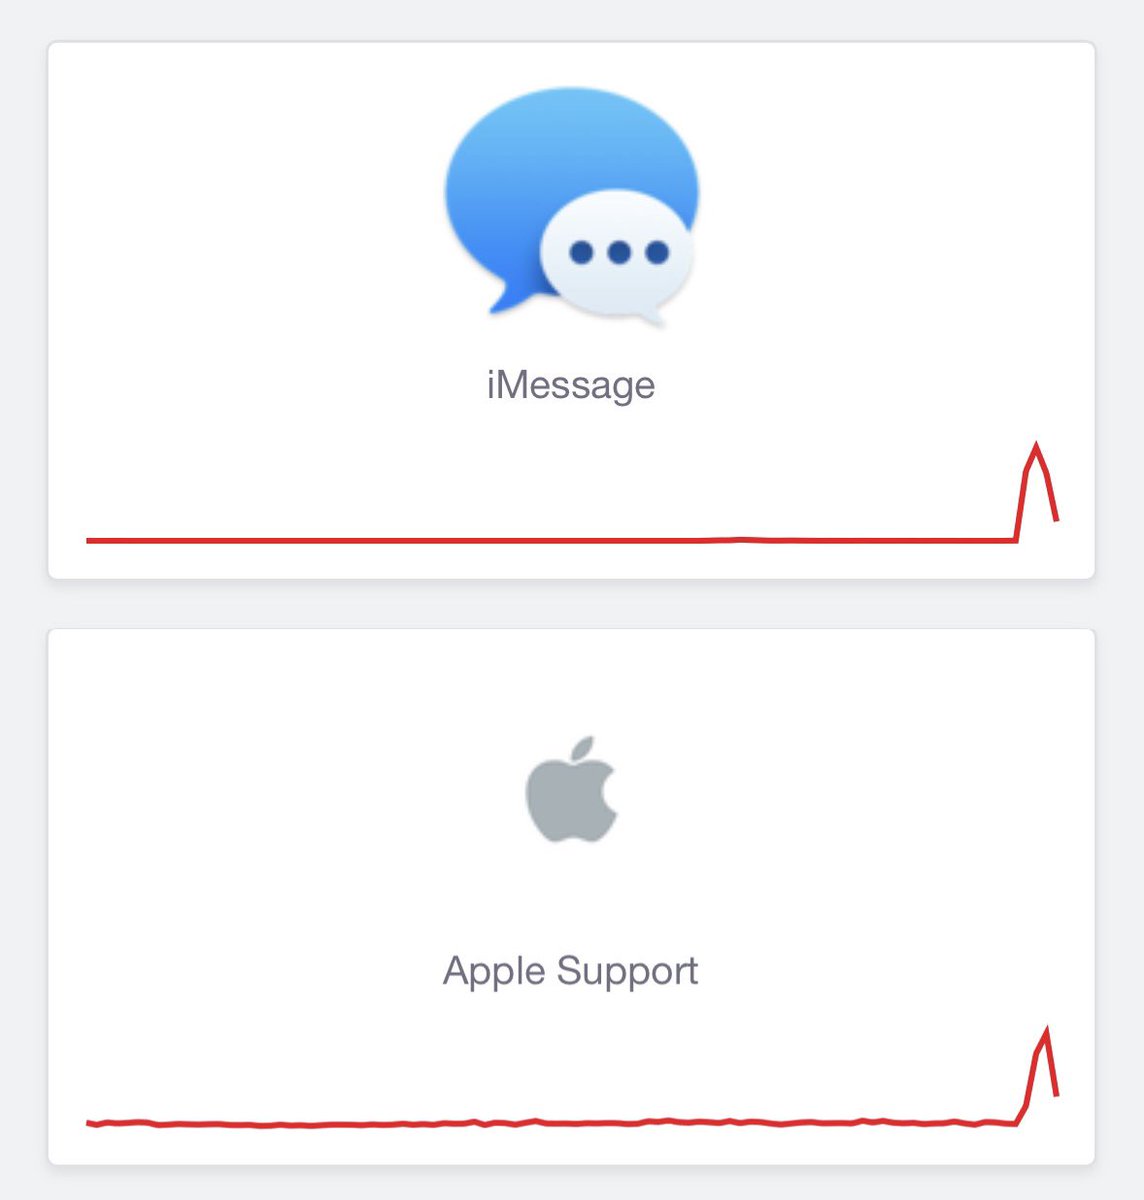 Lol iMessage going down created so many customer service requests that Apple Support went down too